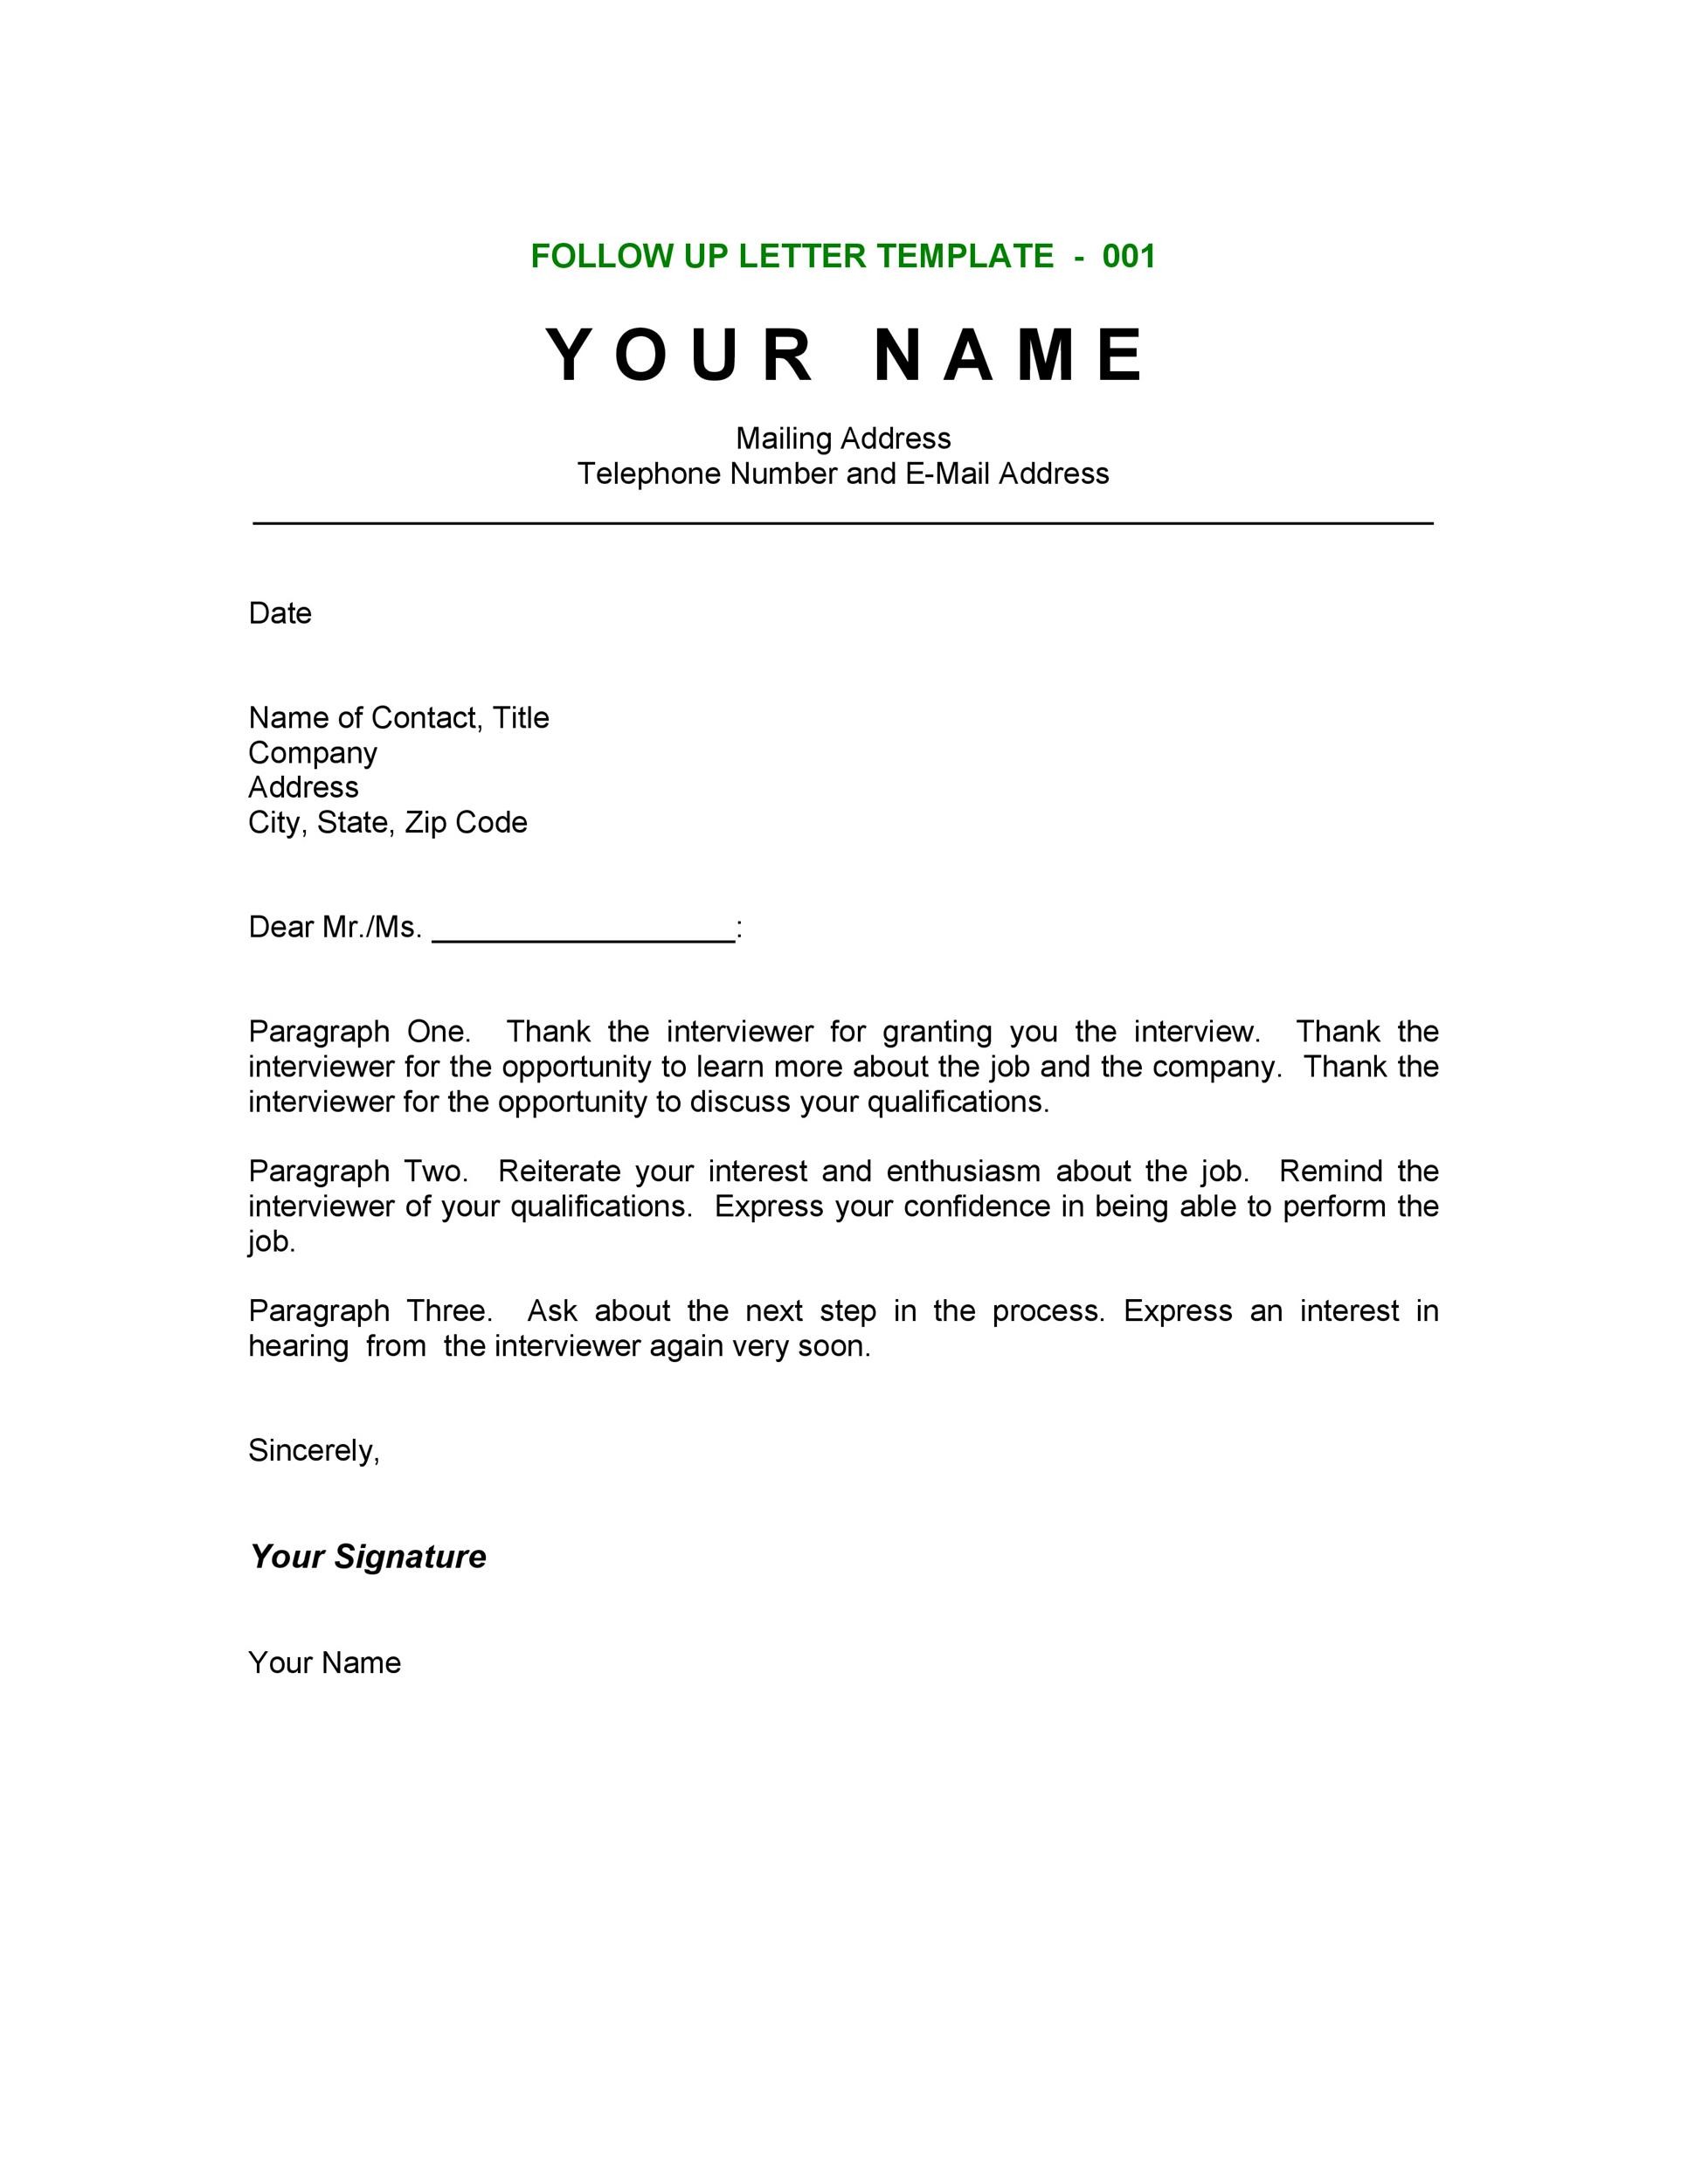 Medical Referral Thank You Letter Template from templatelab.com